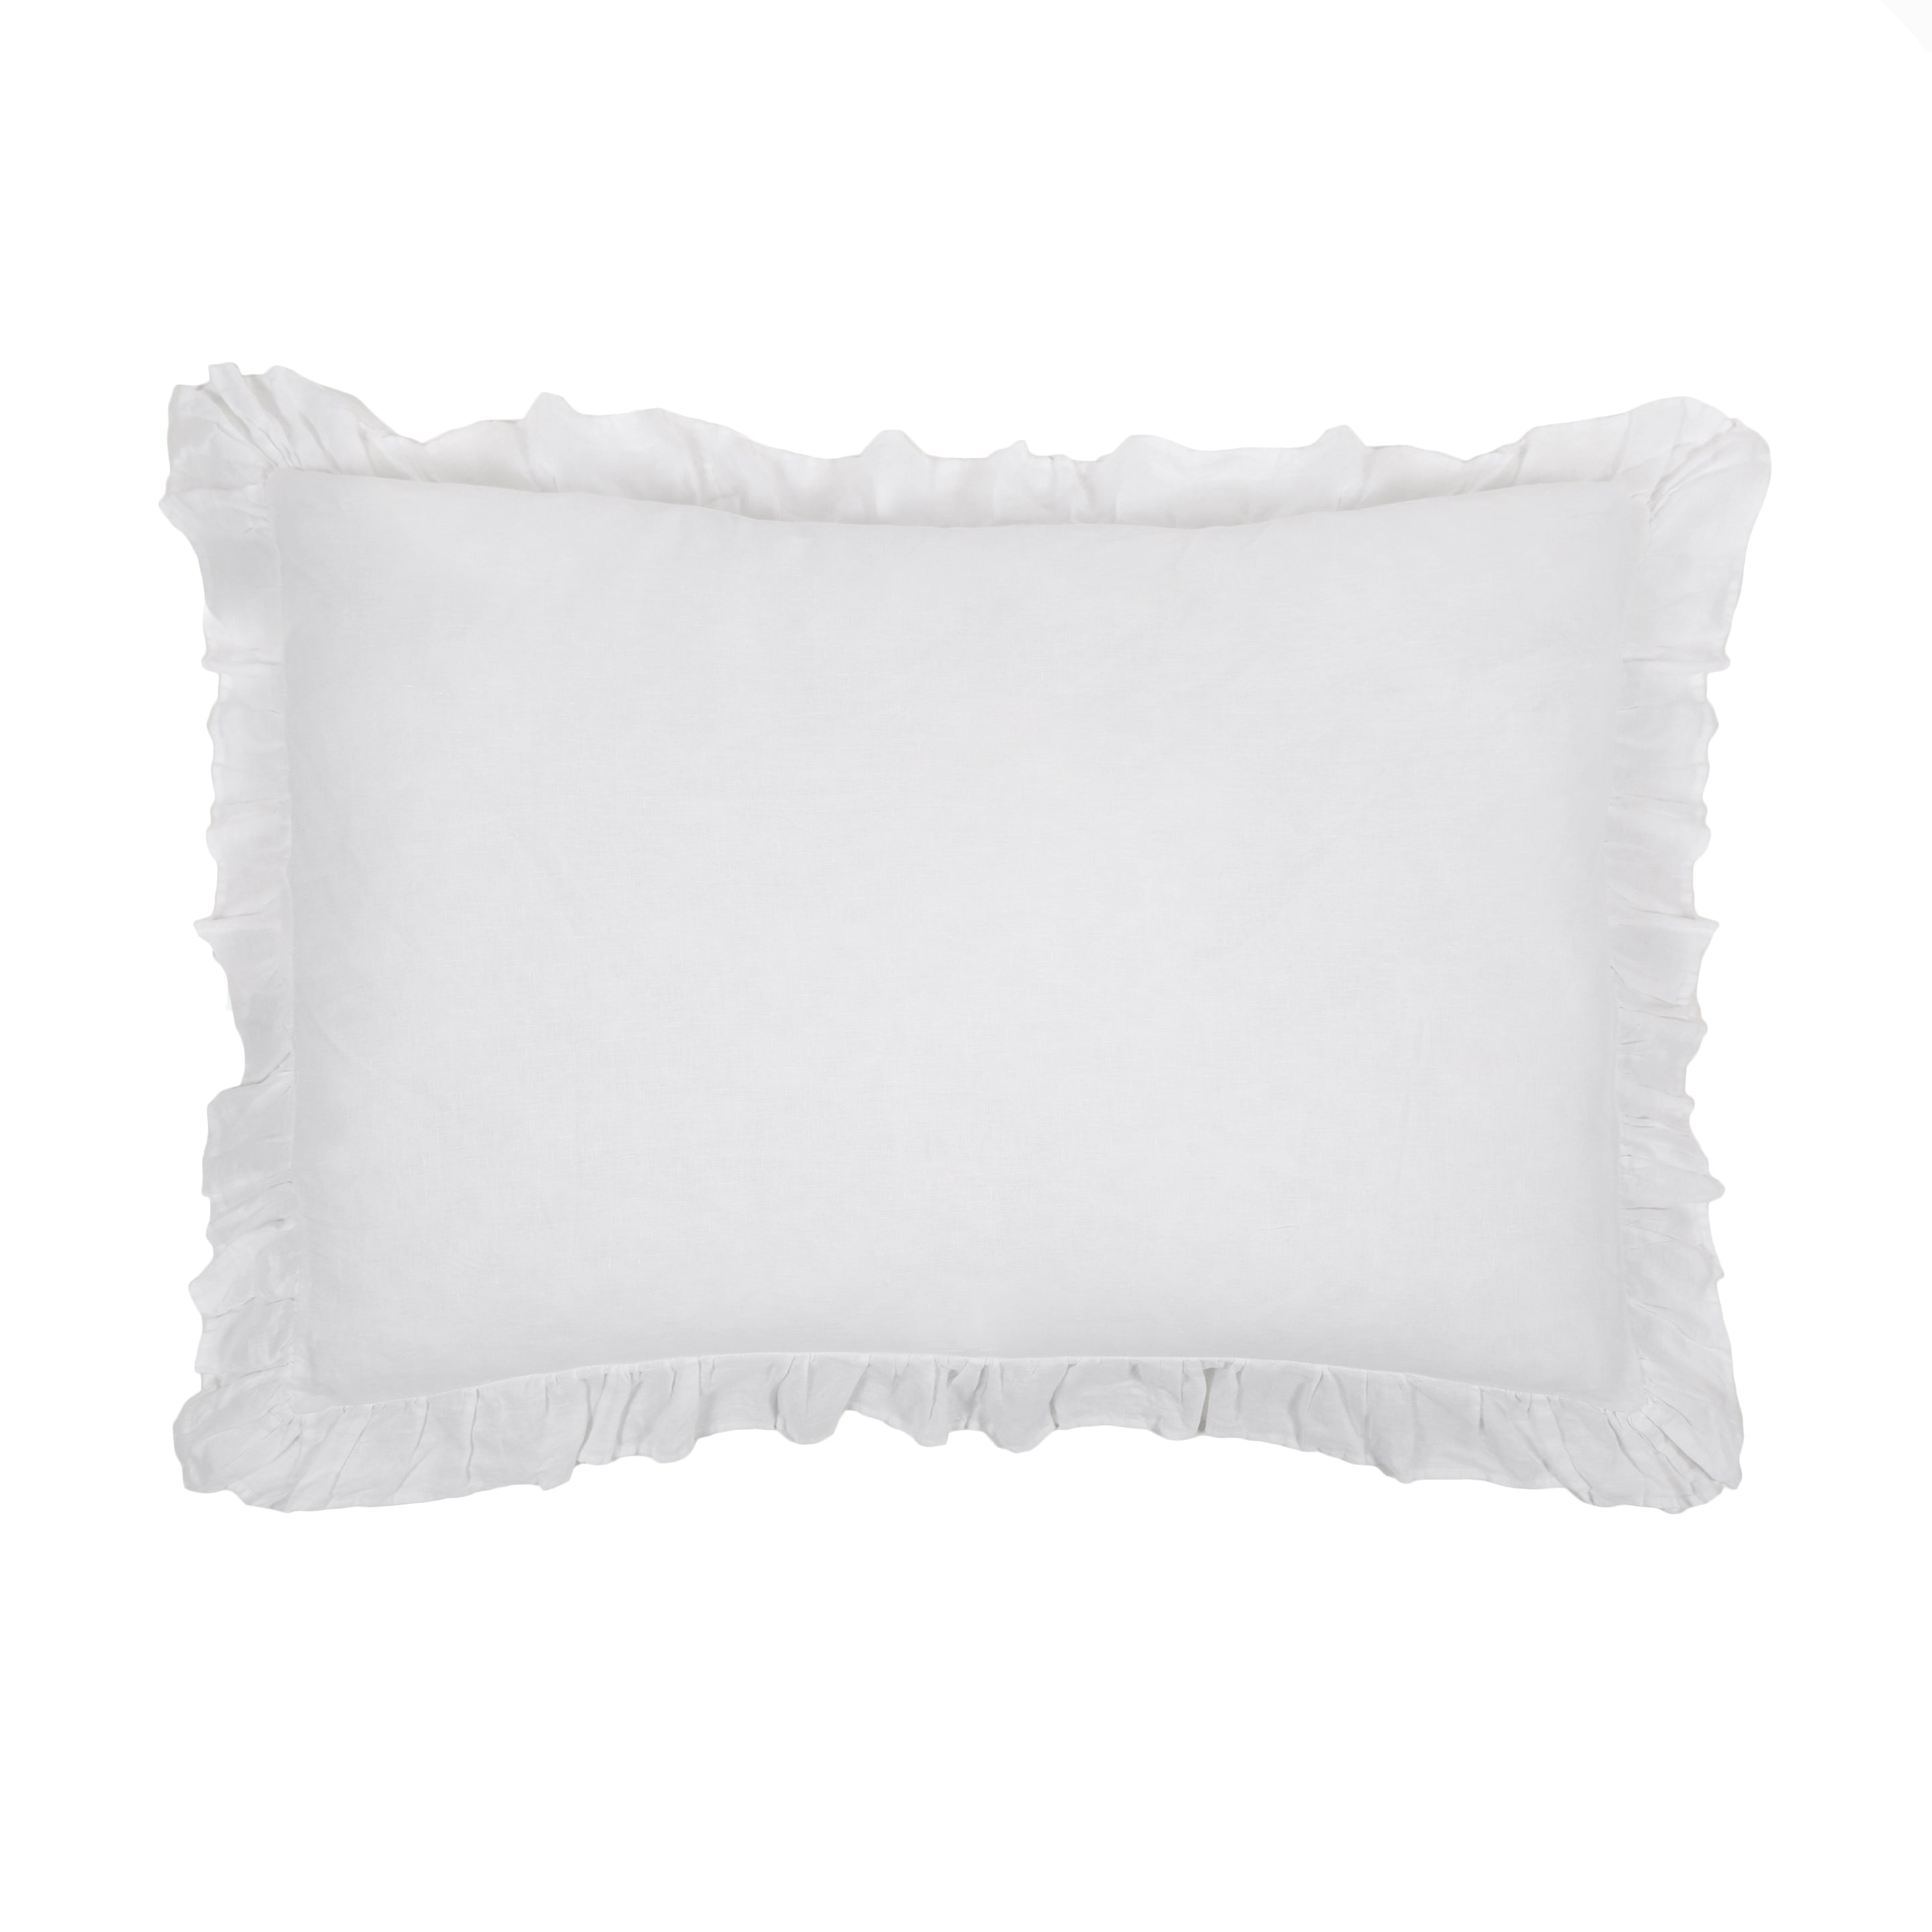 CHARLIE BIG PILLOW WITH INSERT - 3 colors - pom pom at home